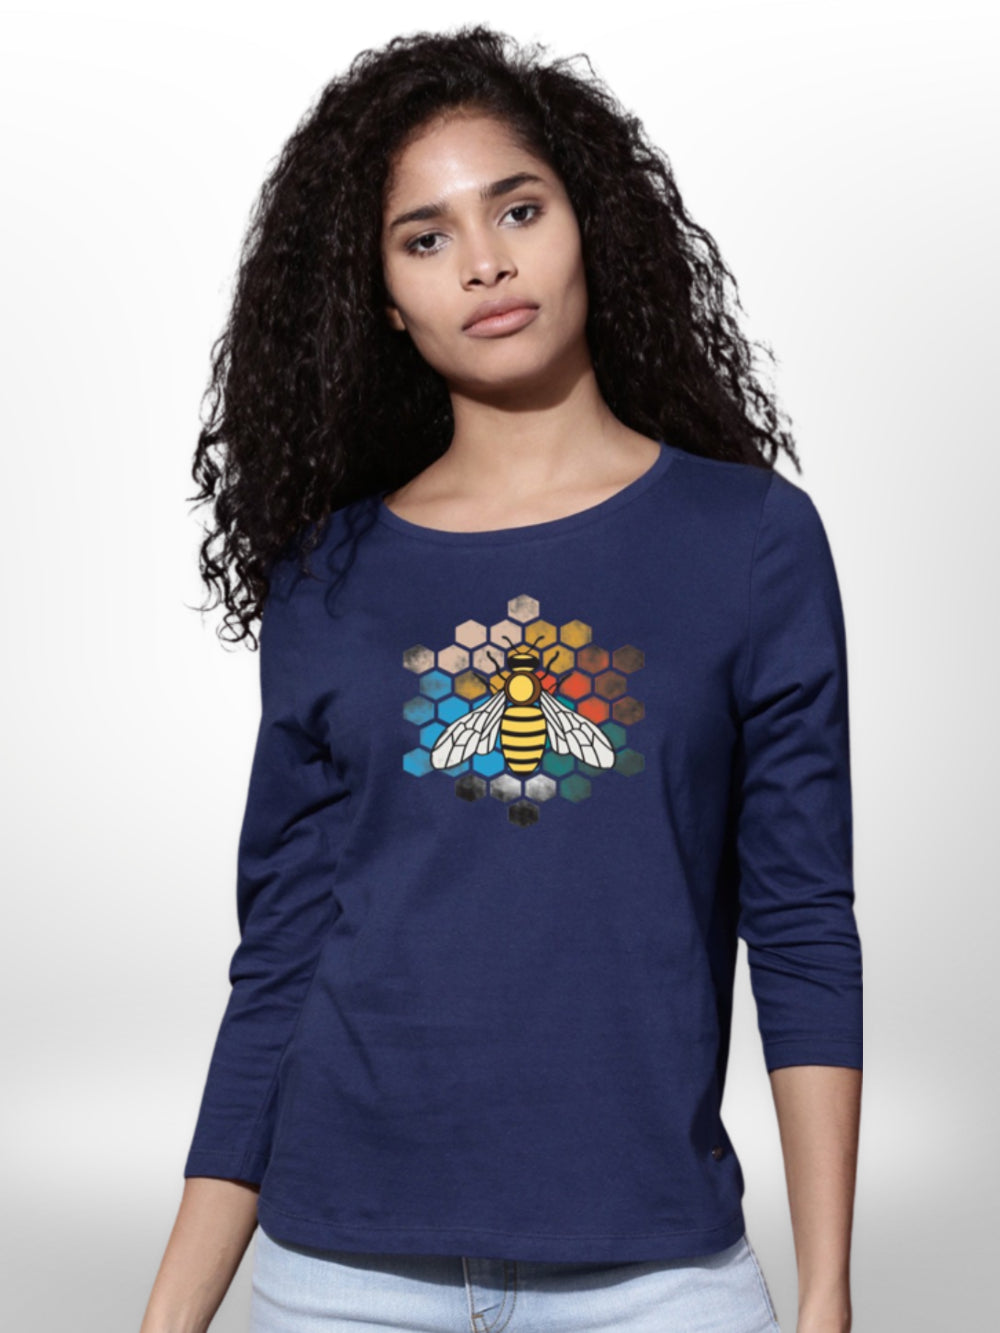 Qeen Bee Printed Girls 4 Quarter Sleeve T-shirt - Legacy Boutiques